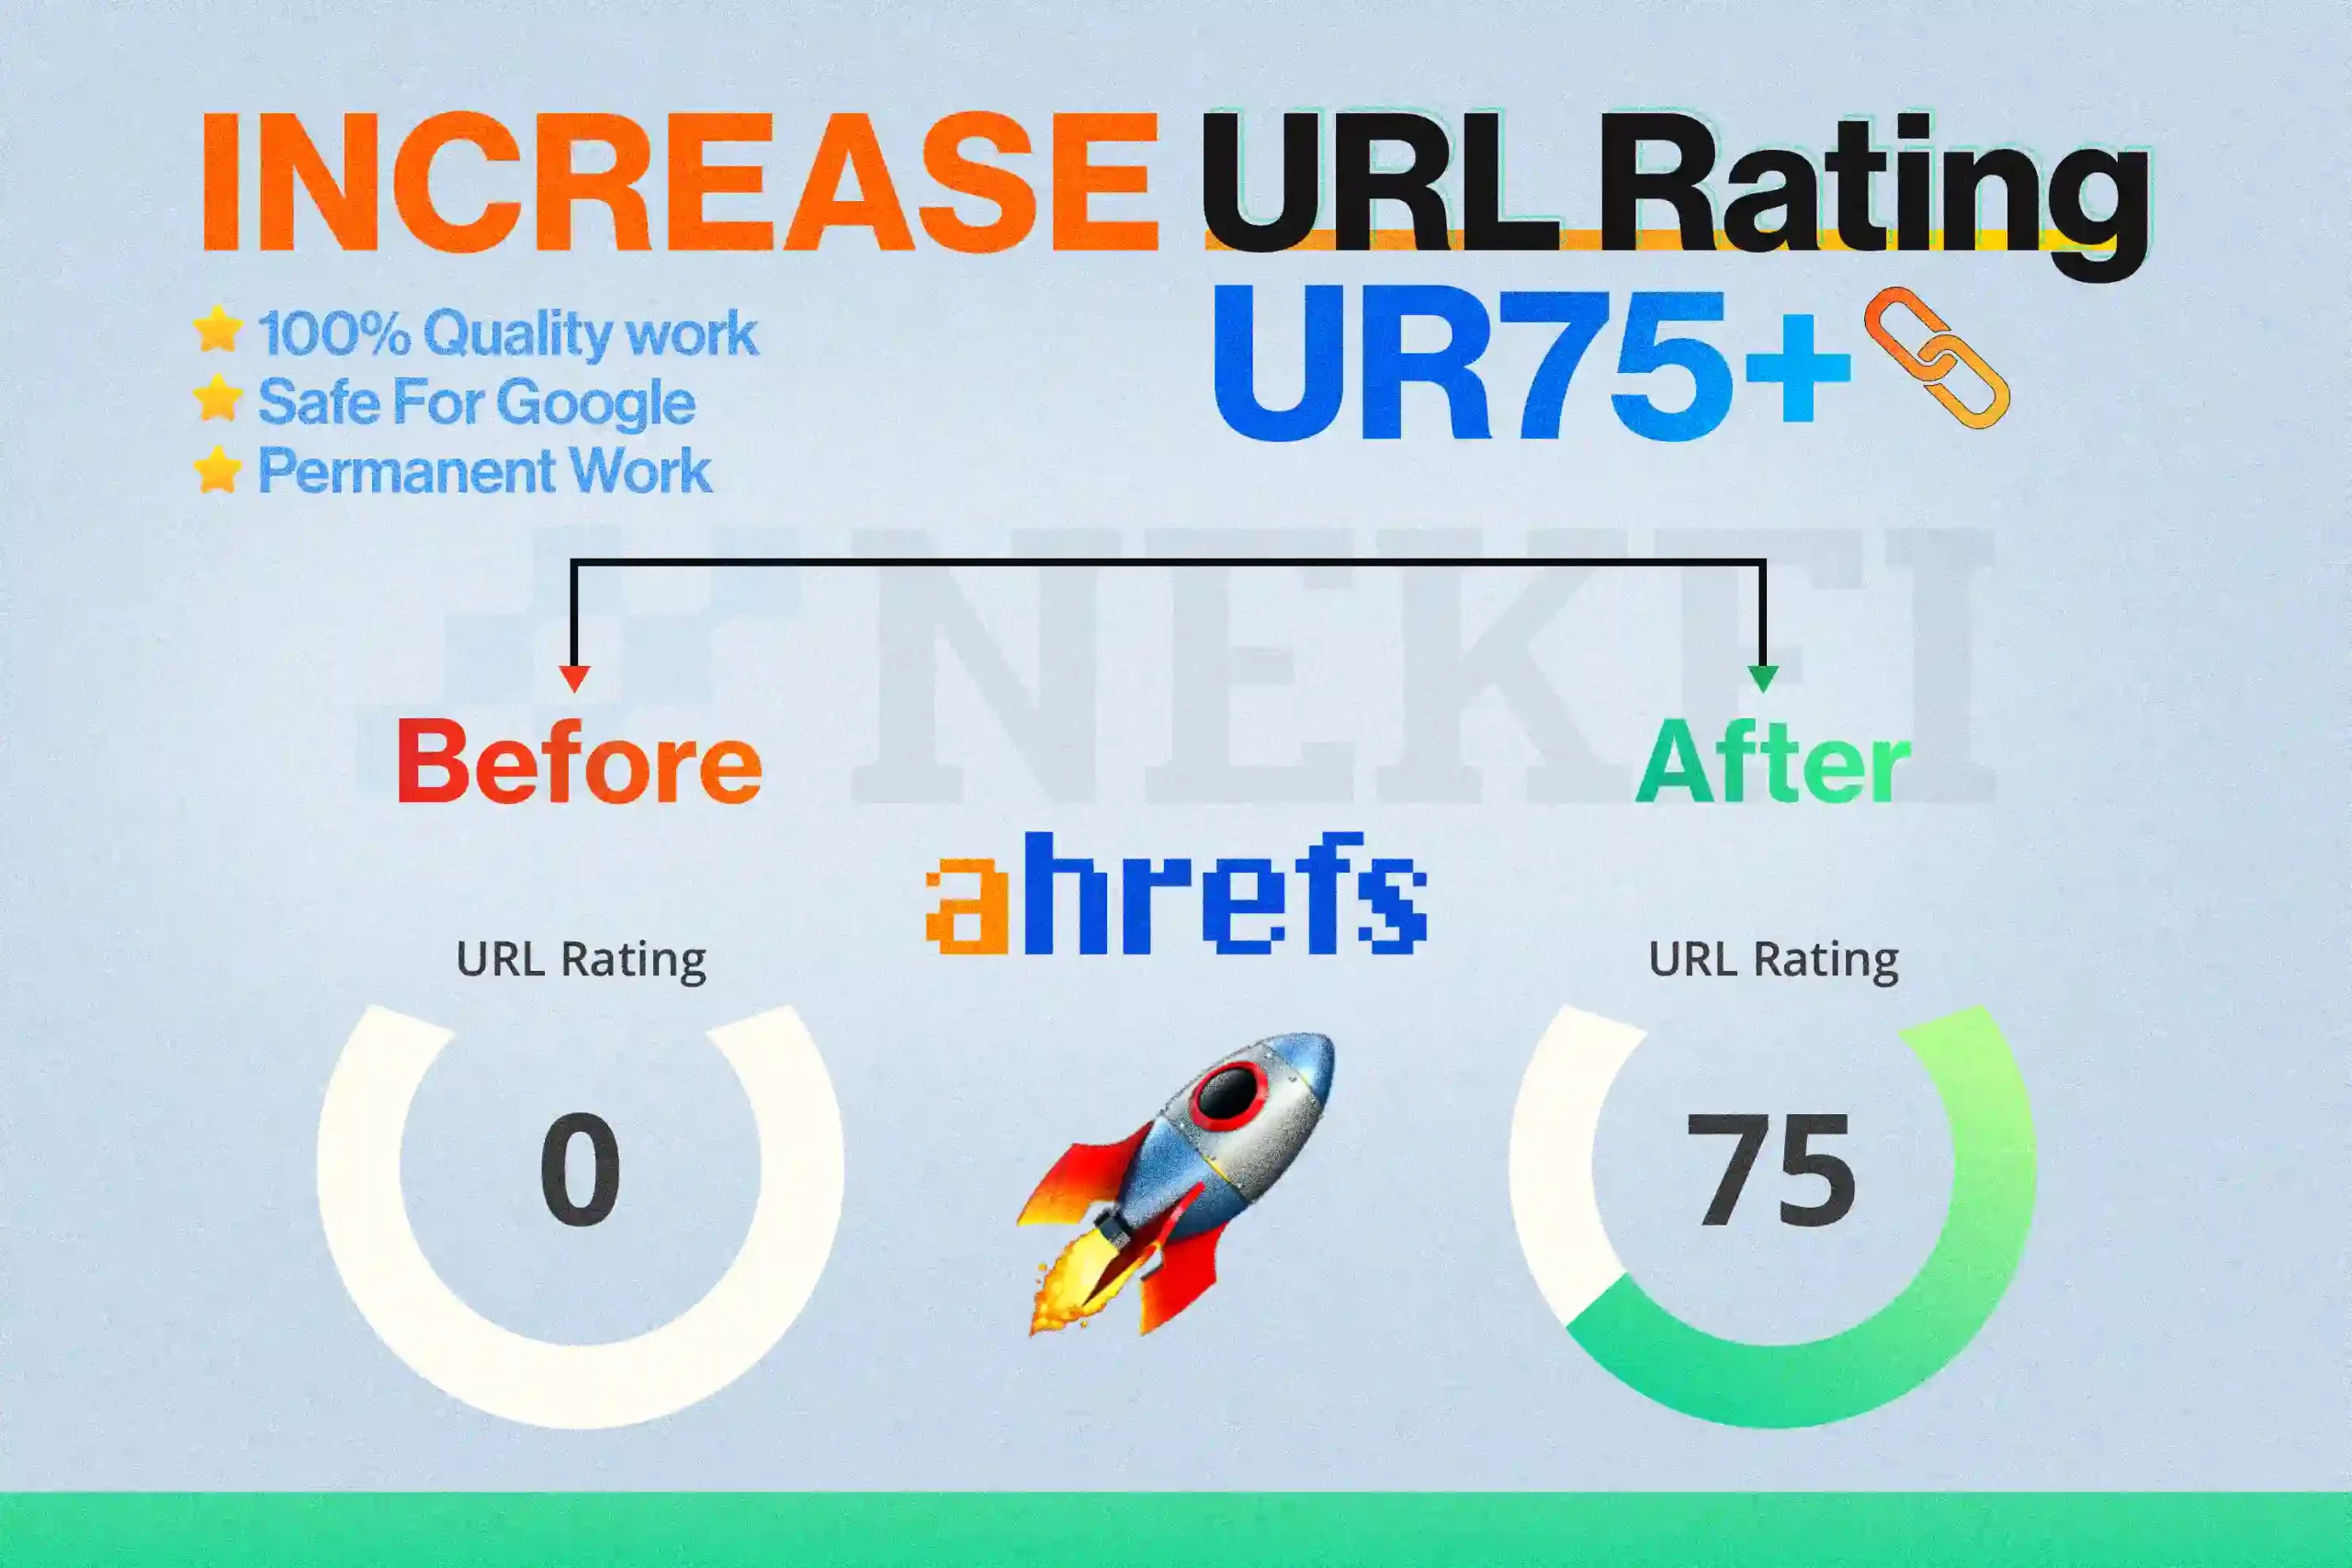 605Increase URL Rating 0 to 75 plus within 7 days – Secrets Backlinks